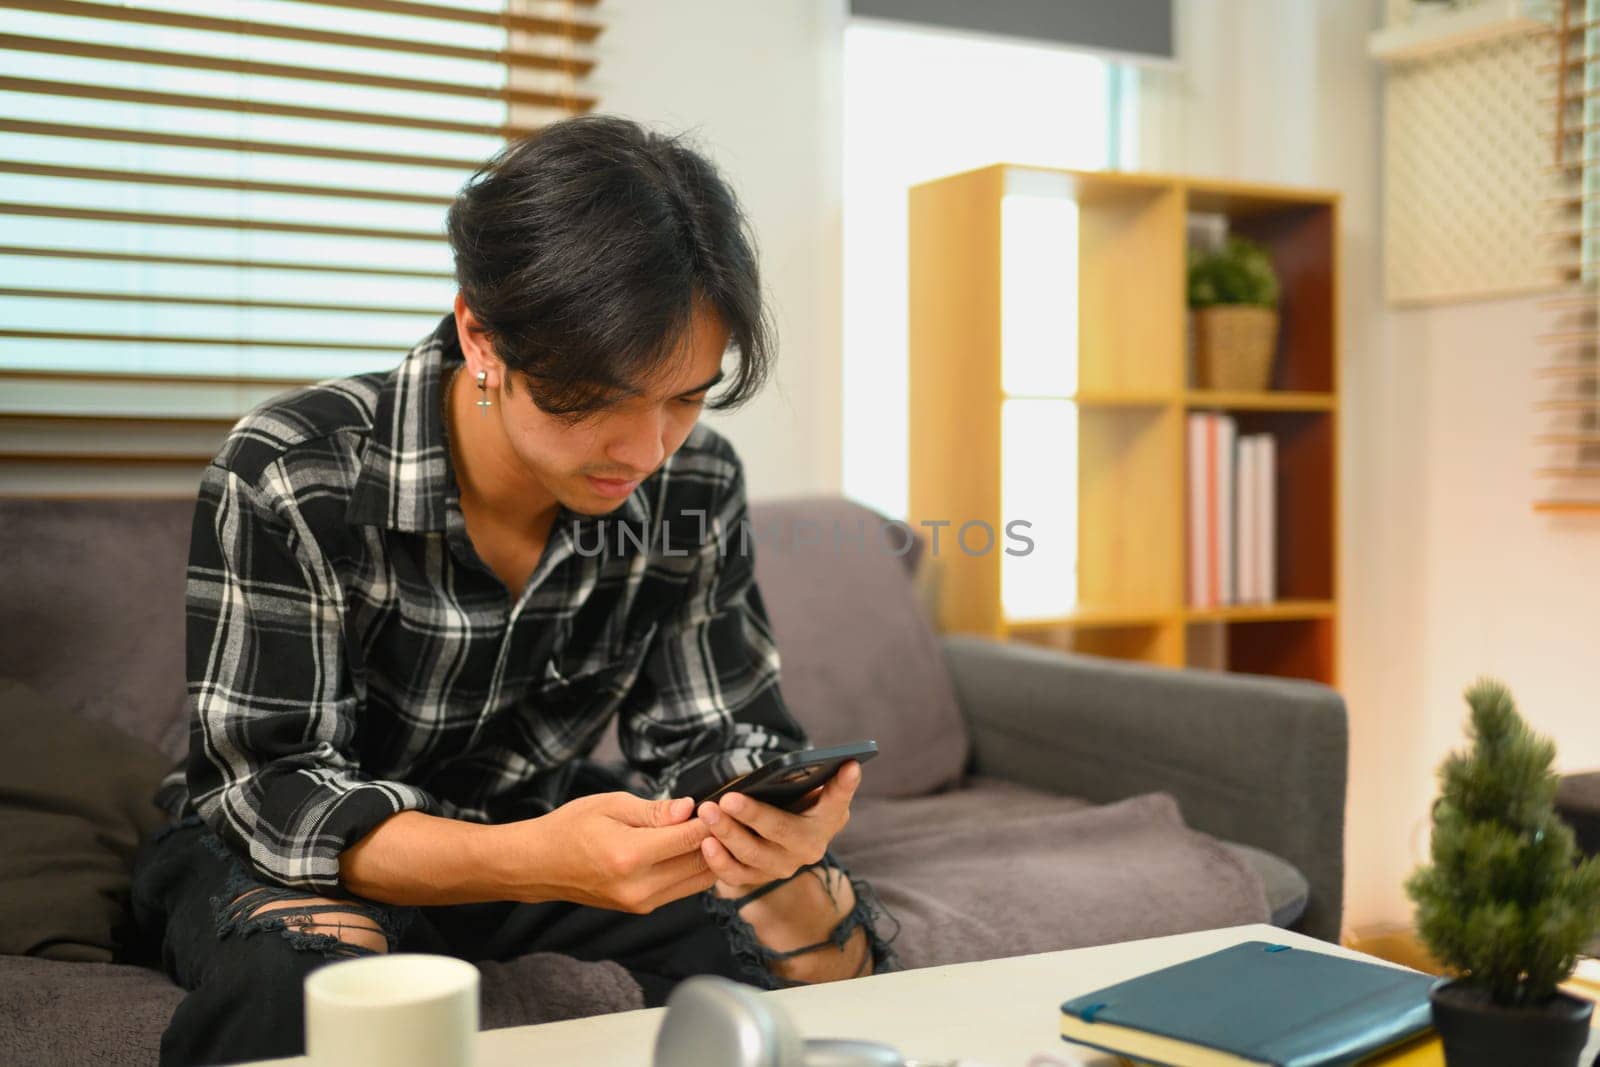 Young man browsing internet and texting online on mobile phone.